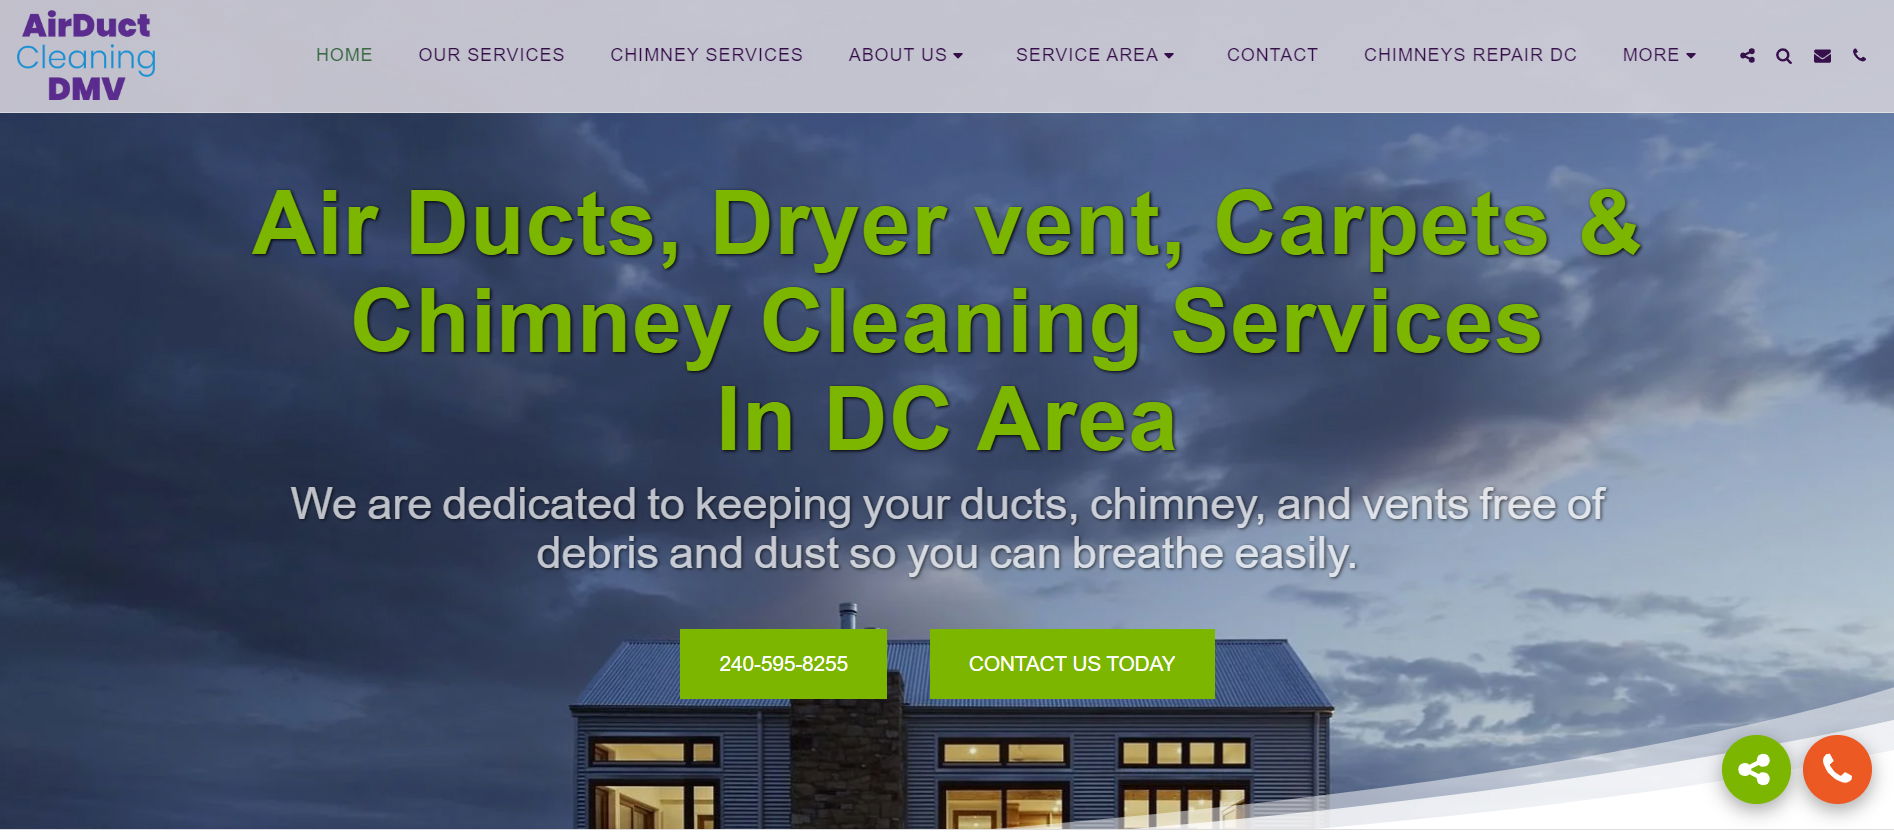 airduct-cleaning-dmv